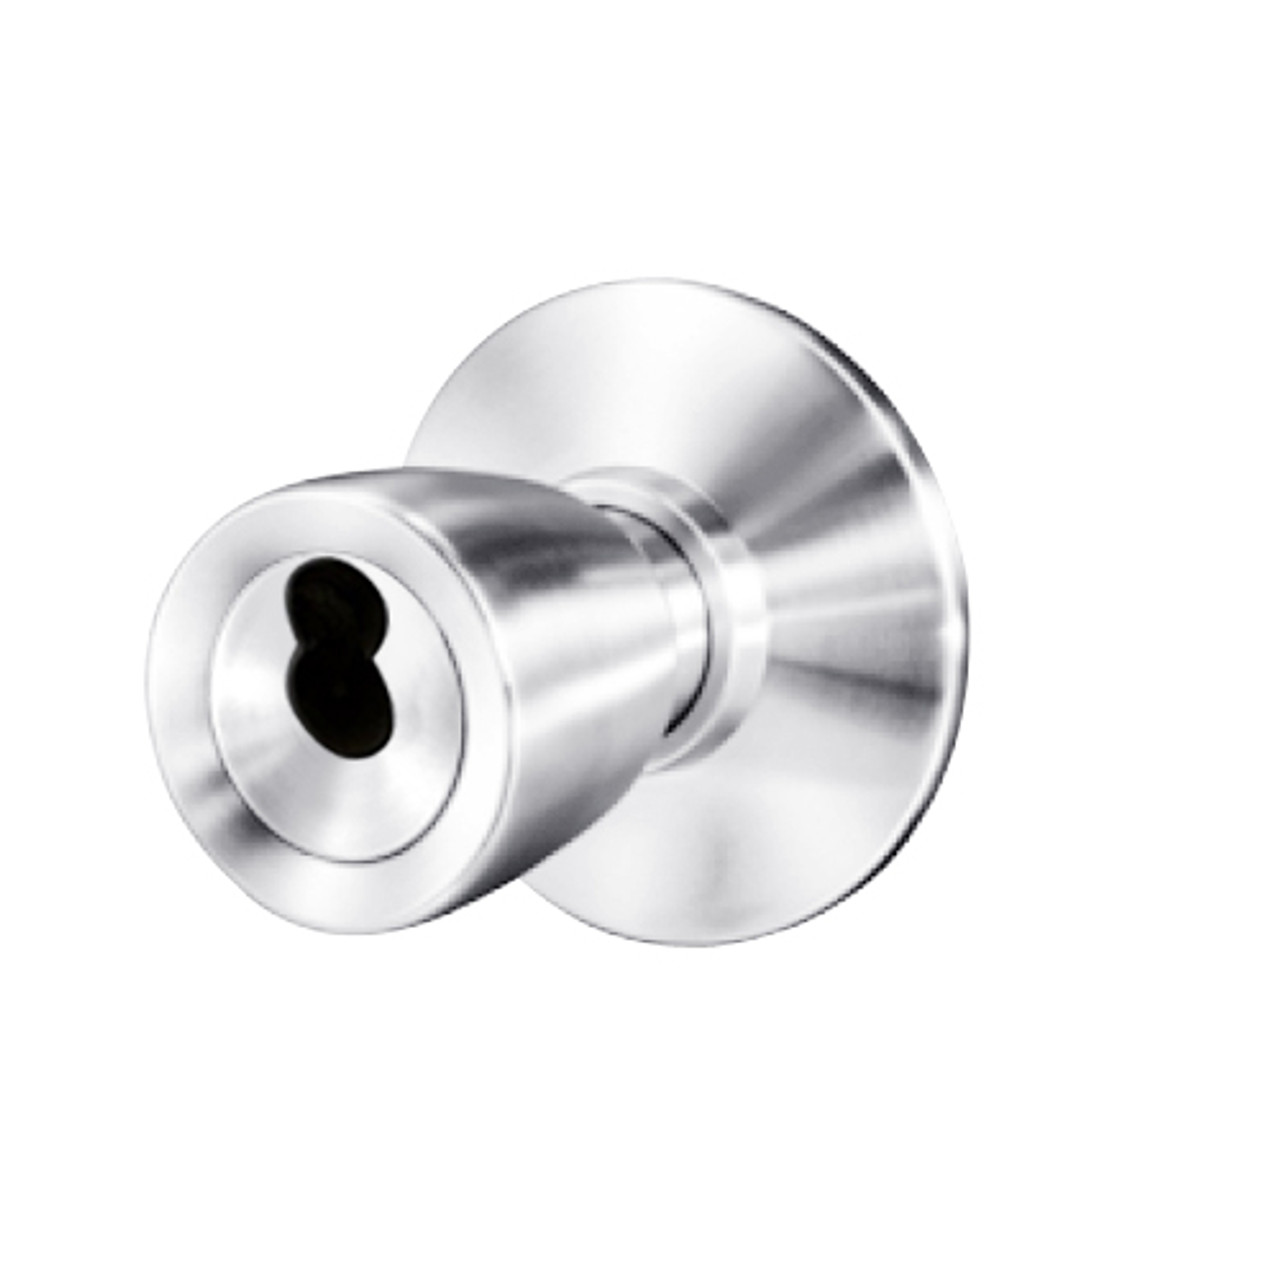 8K37B6DS3625 Best 8K Series Office Heavy Duty Cylindrical Knob Locks with Tulip Style in Bright Chrome